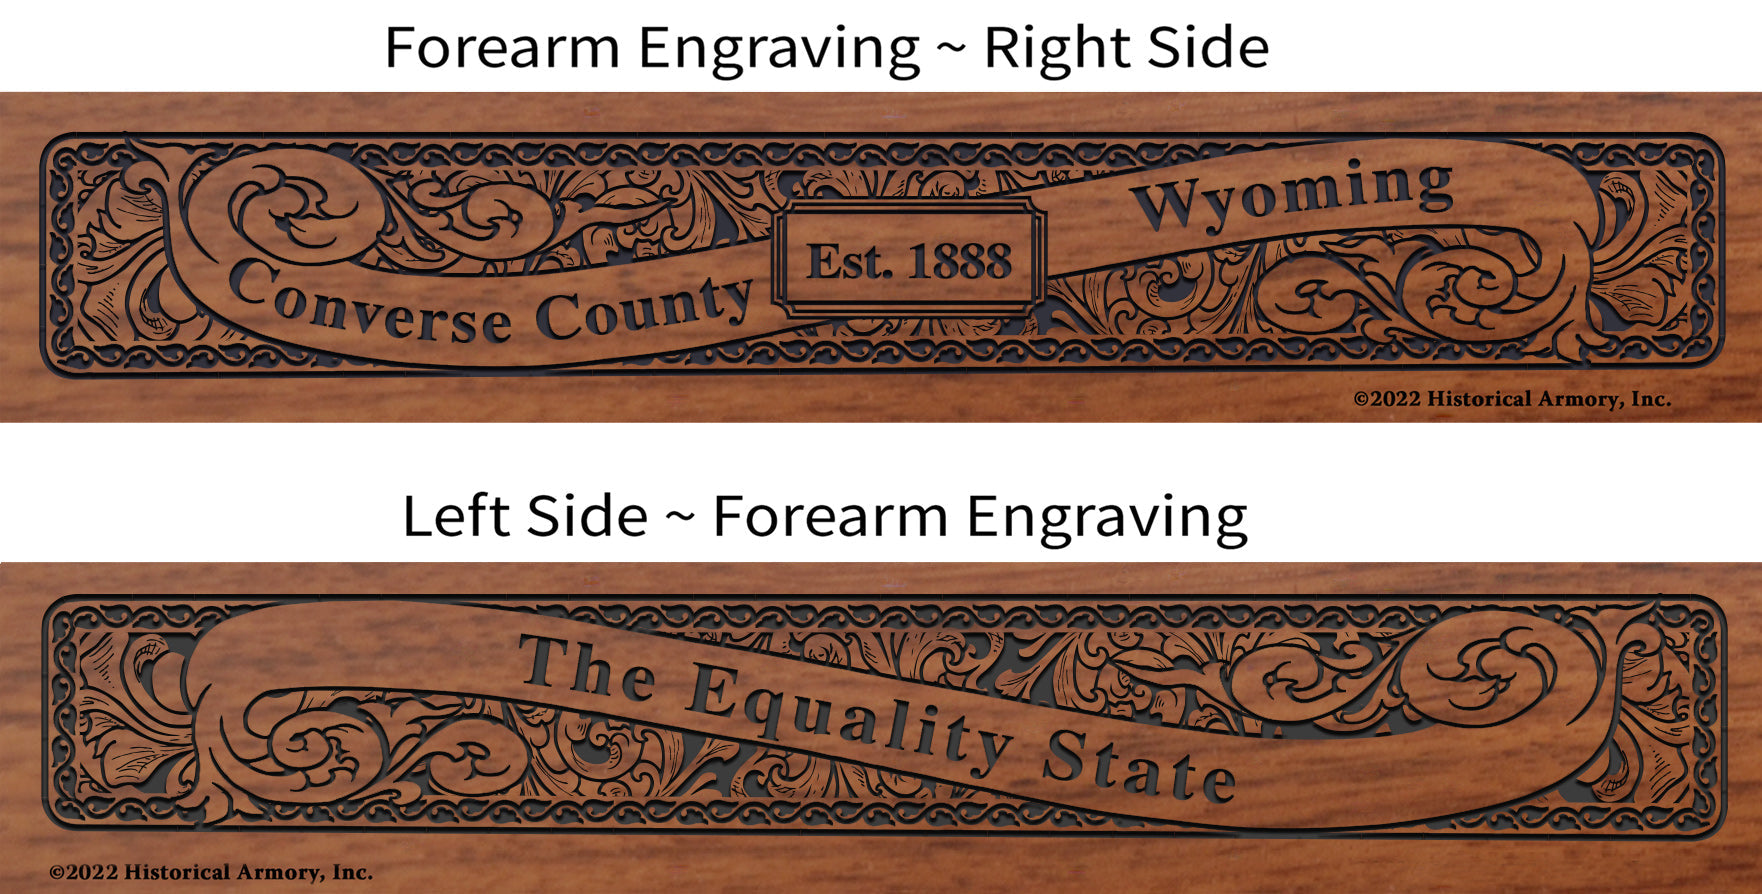 Converse County Wyoming Engraved Rifle Forearm